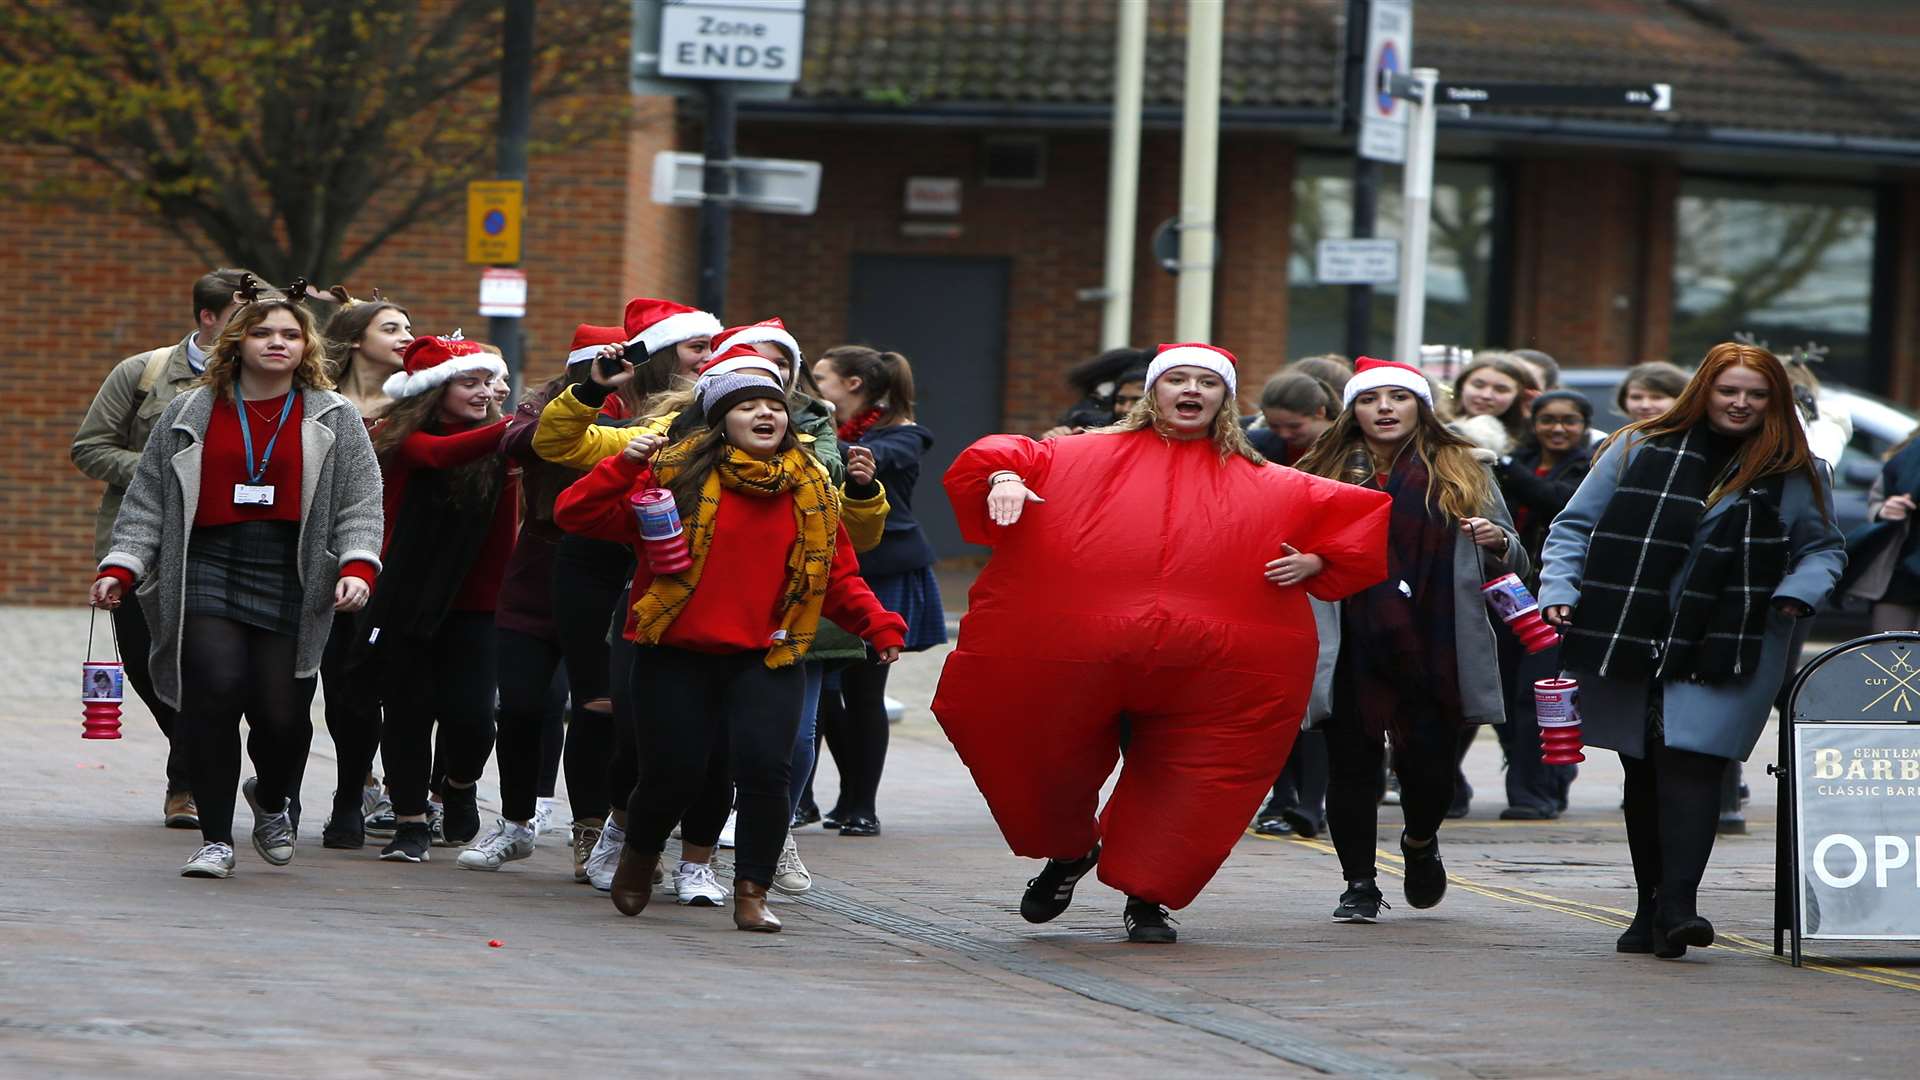 Pupils from Highworth Grammar School doing a sponsored conga from the school to the High Street.